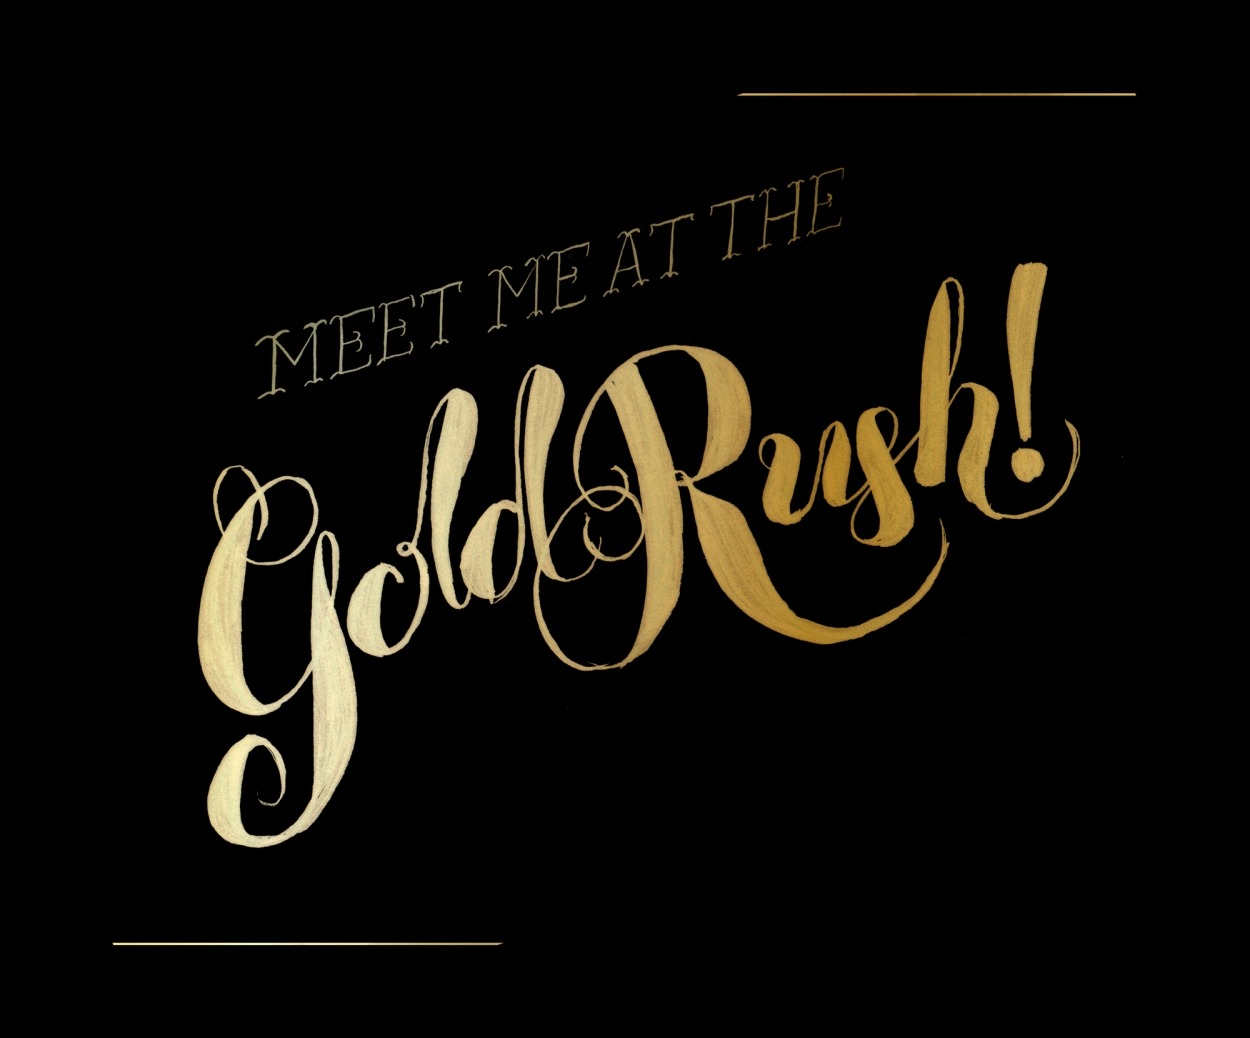 Meet me at the Gold Rush